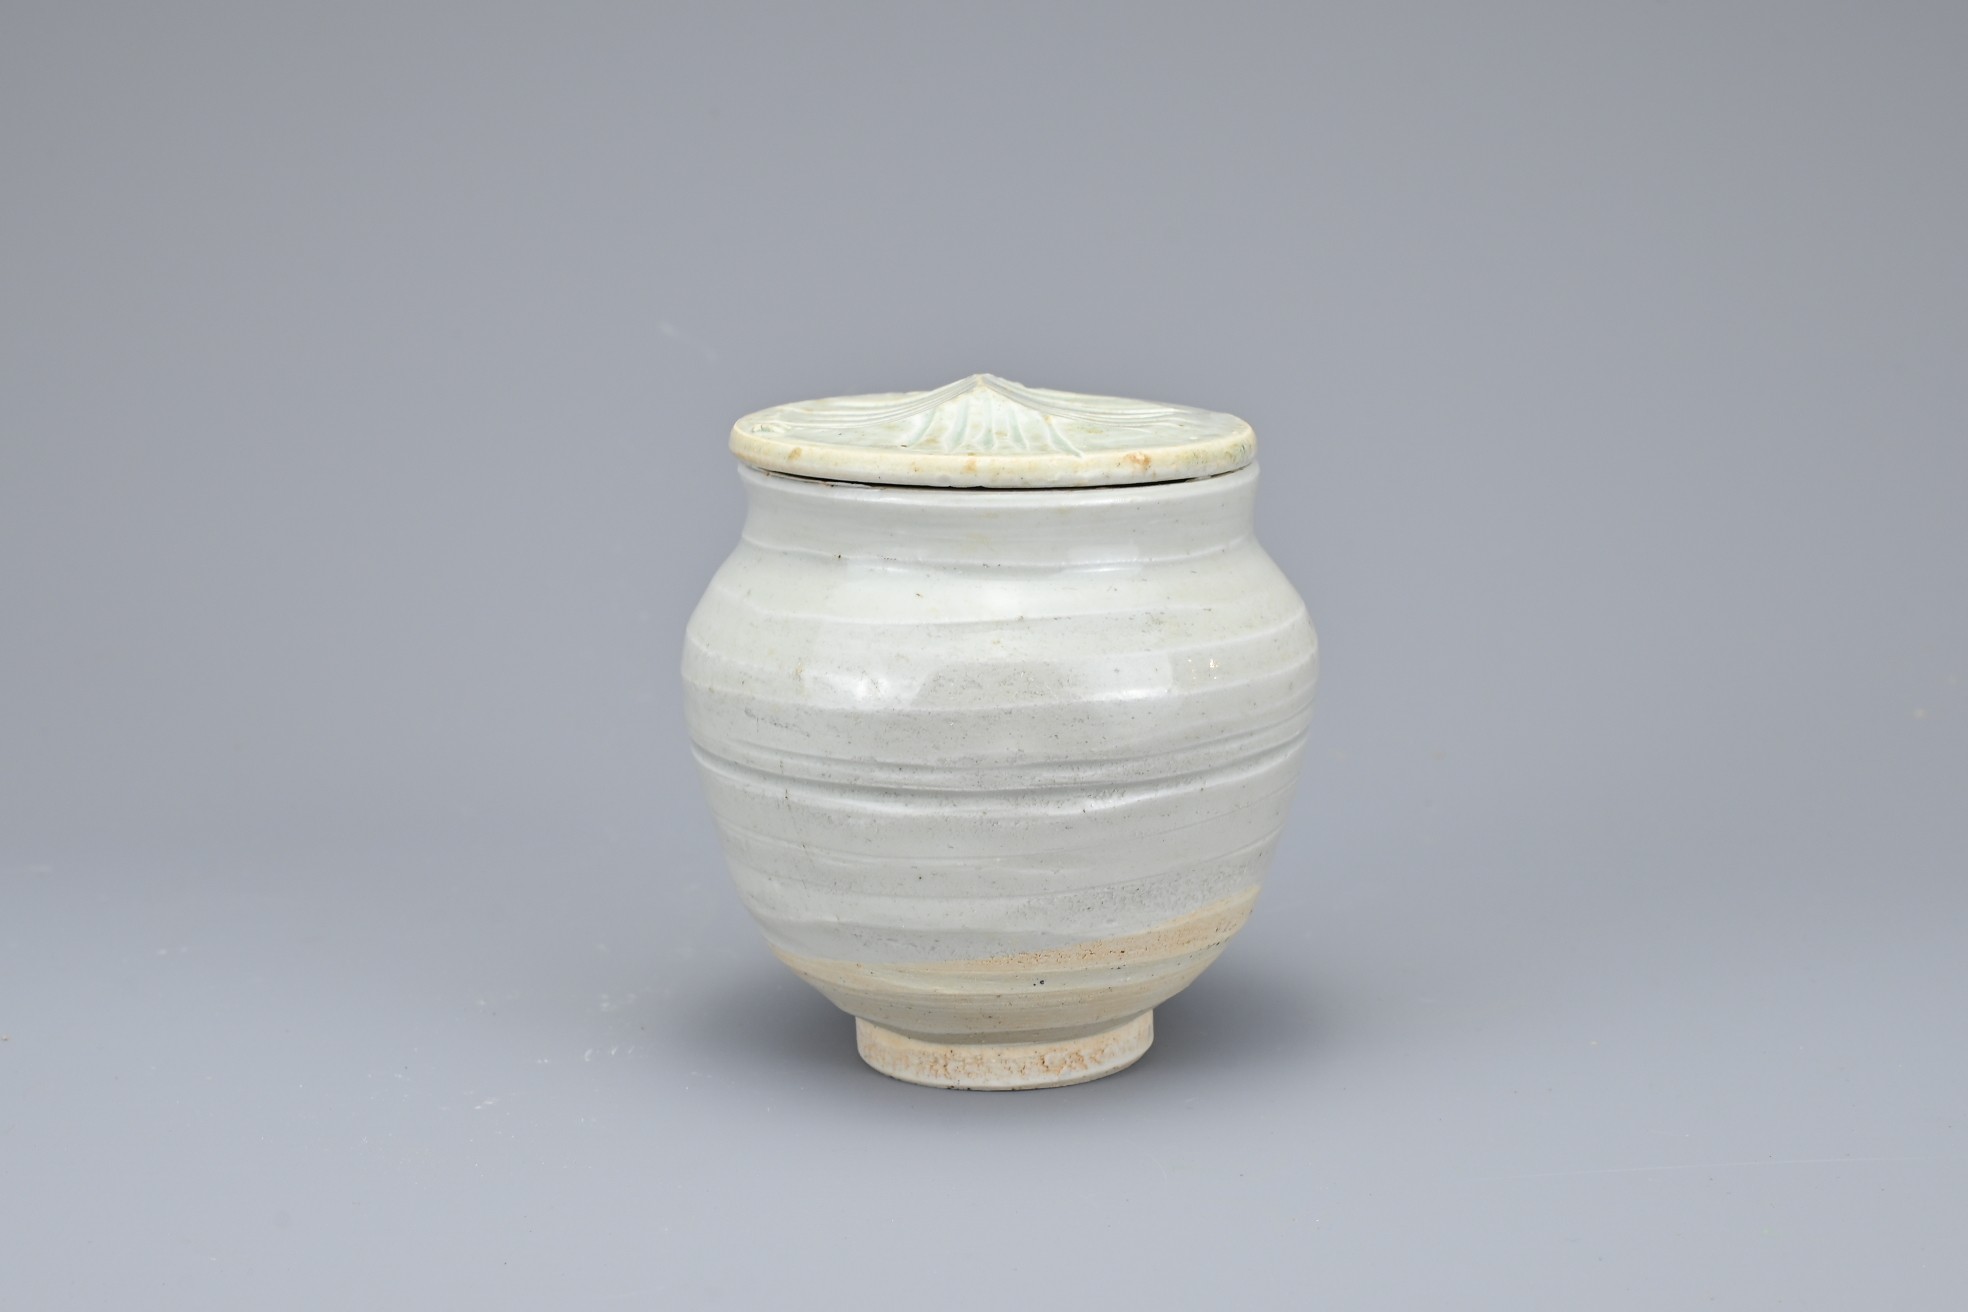 A CHINESE QINGBAI GLAZED COVERED PORCELAIN JAR, SONG / YUAN DYNASTY. Coated inside and out in a - Image 4 of 7